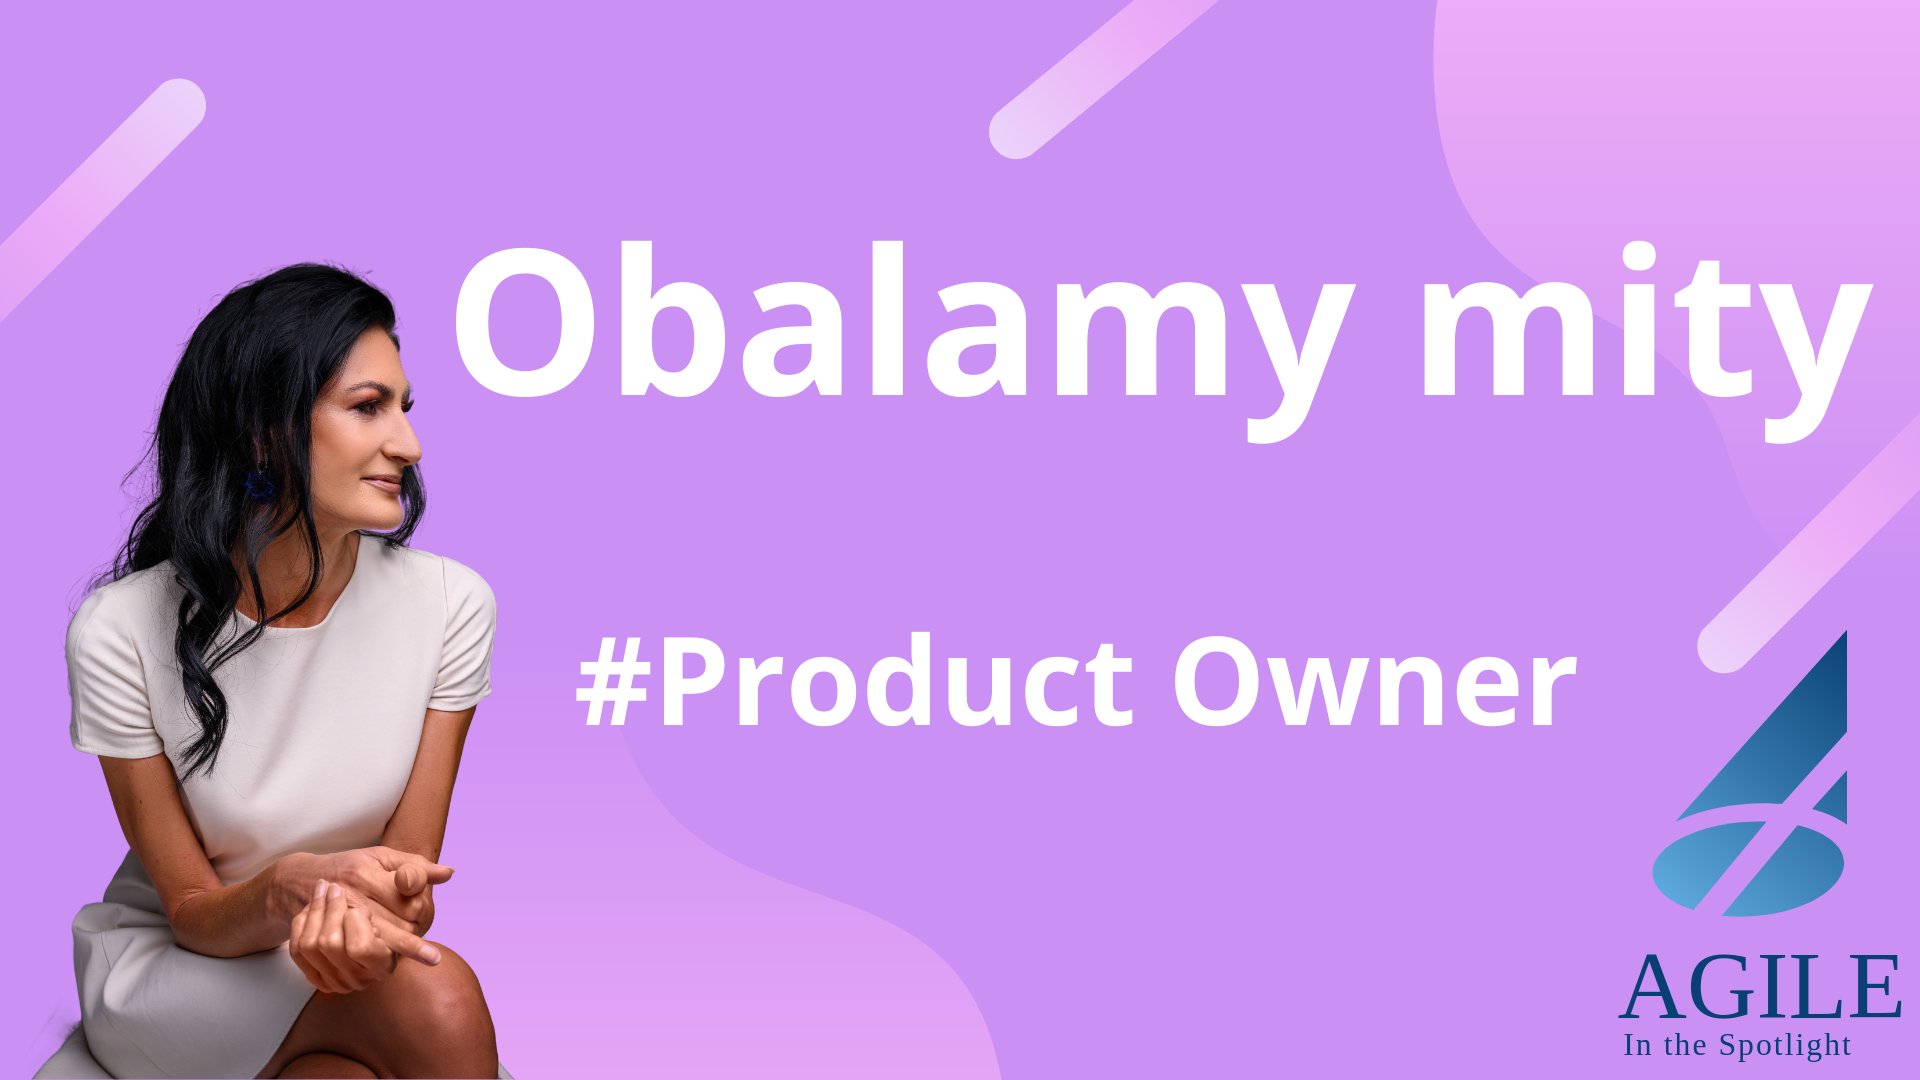 Obalamy mity - Product Owner